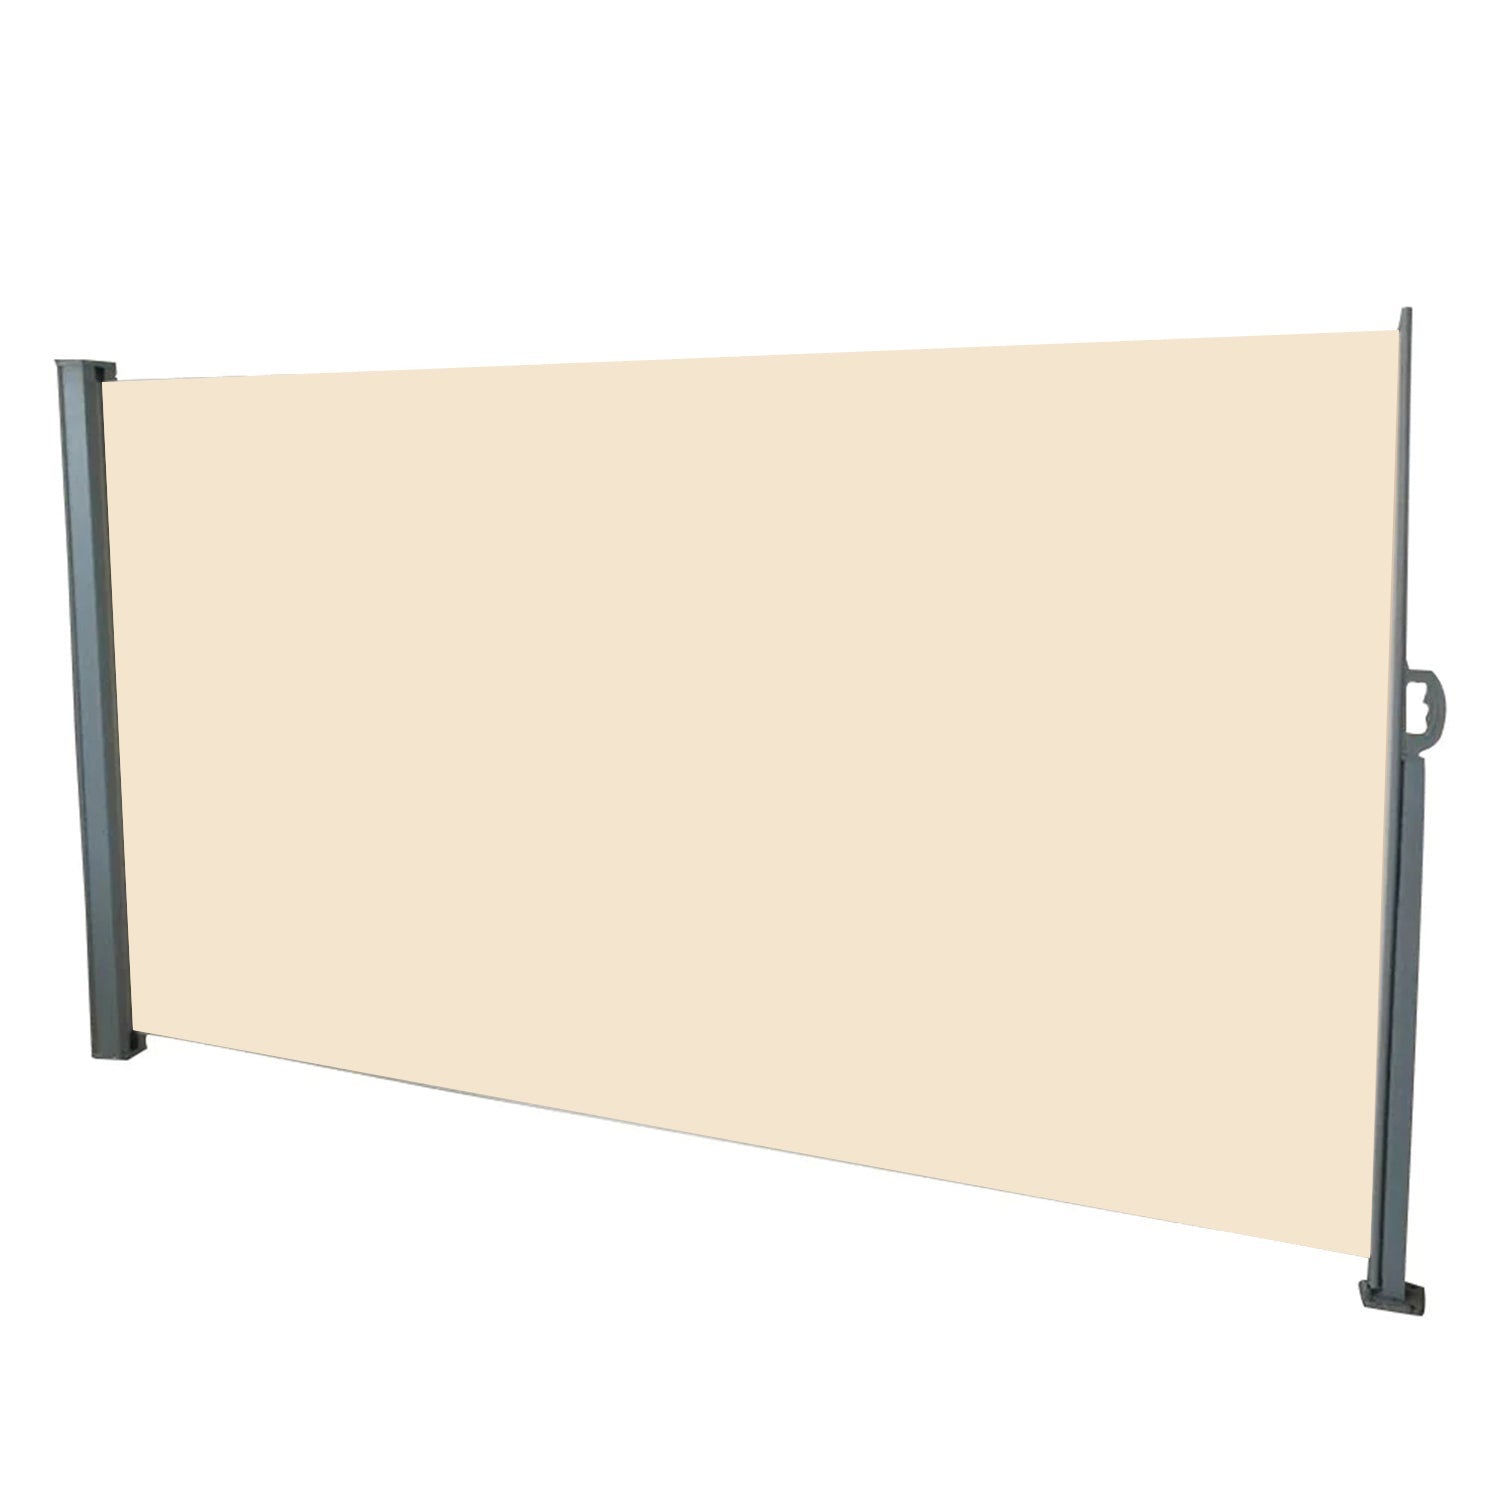 Side Awning Beige 180x300cm Sun Shade Indoor Outdoor Blinds Retractable Partition Screen